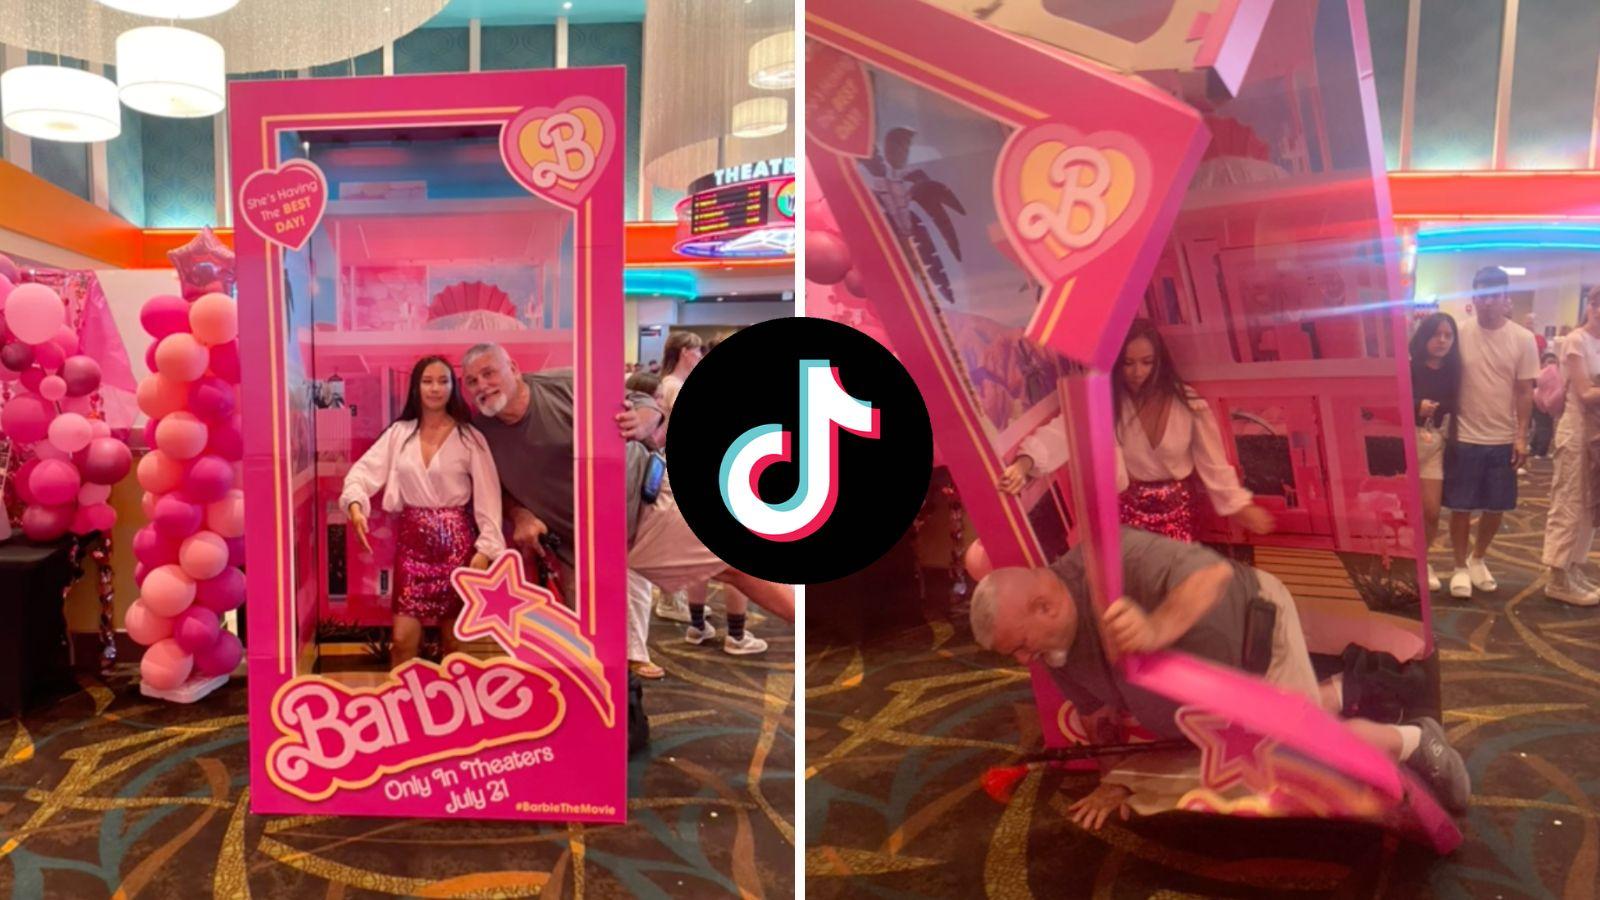 Man accidentally destroys Barbie photo op after photobombing woman - Dexerto